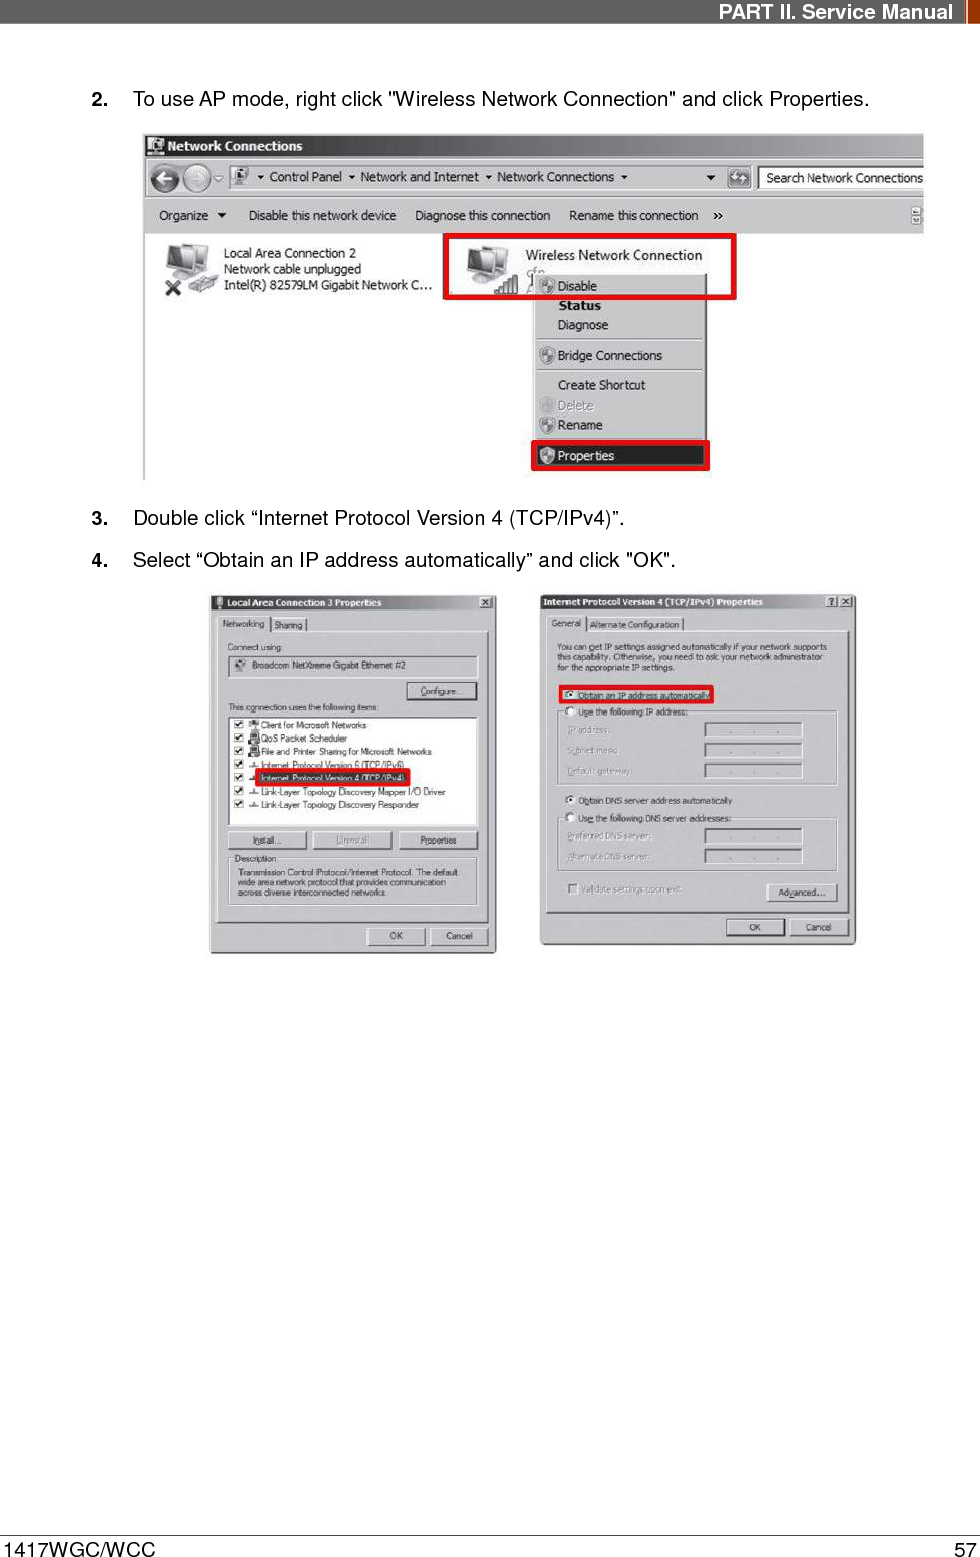 PART II. Service Manual  1417WGC/WCC 57 2. To use AP mode, right click &quot;Wireless Network Connection&quot; and click Properties.  3. Double click “Internet Protocol Version 4 (TCP/IPv4)”. 4. Select “Obtain an IP address automatically” and click &quot;OK&quot;.       